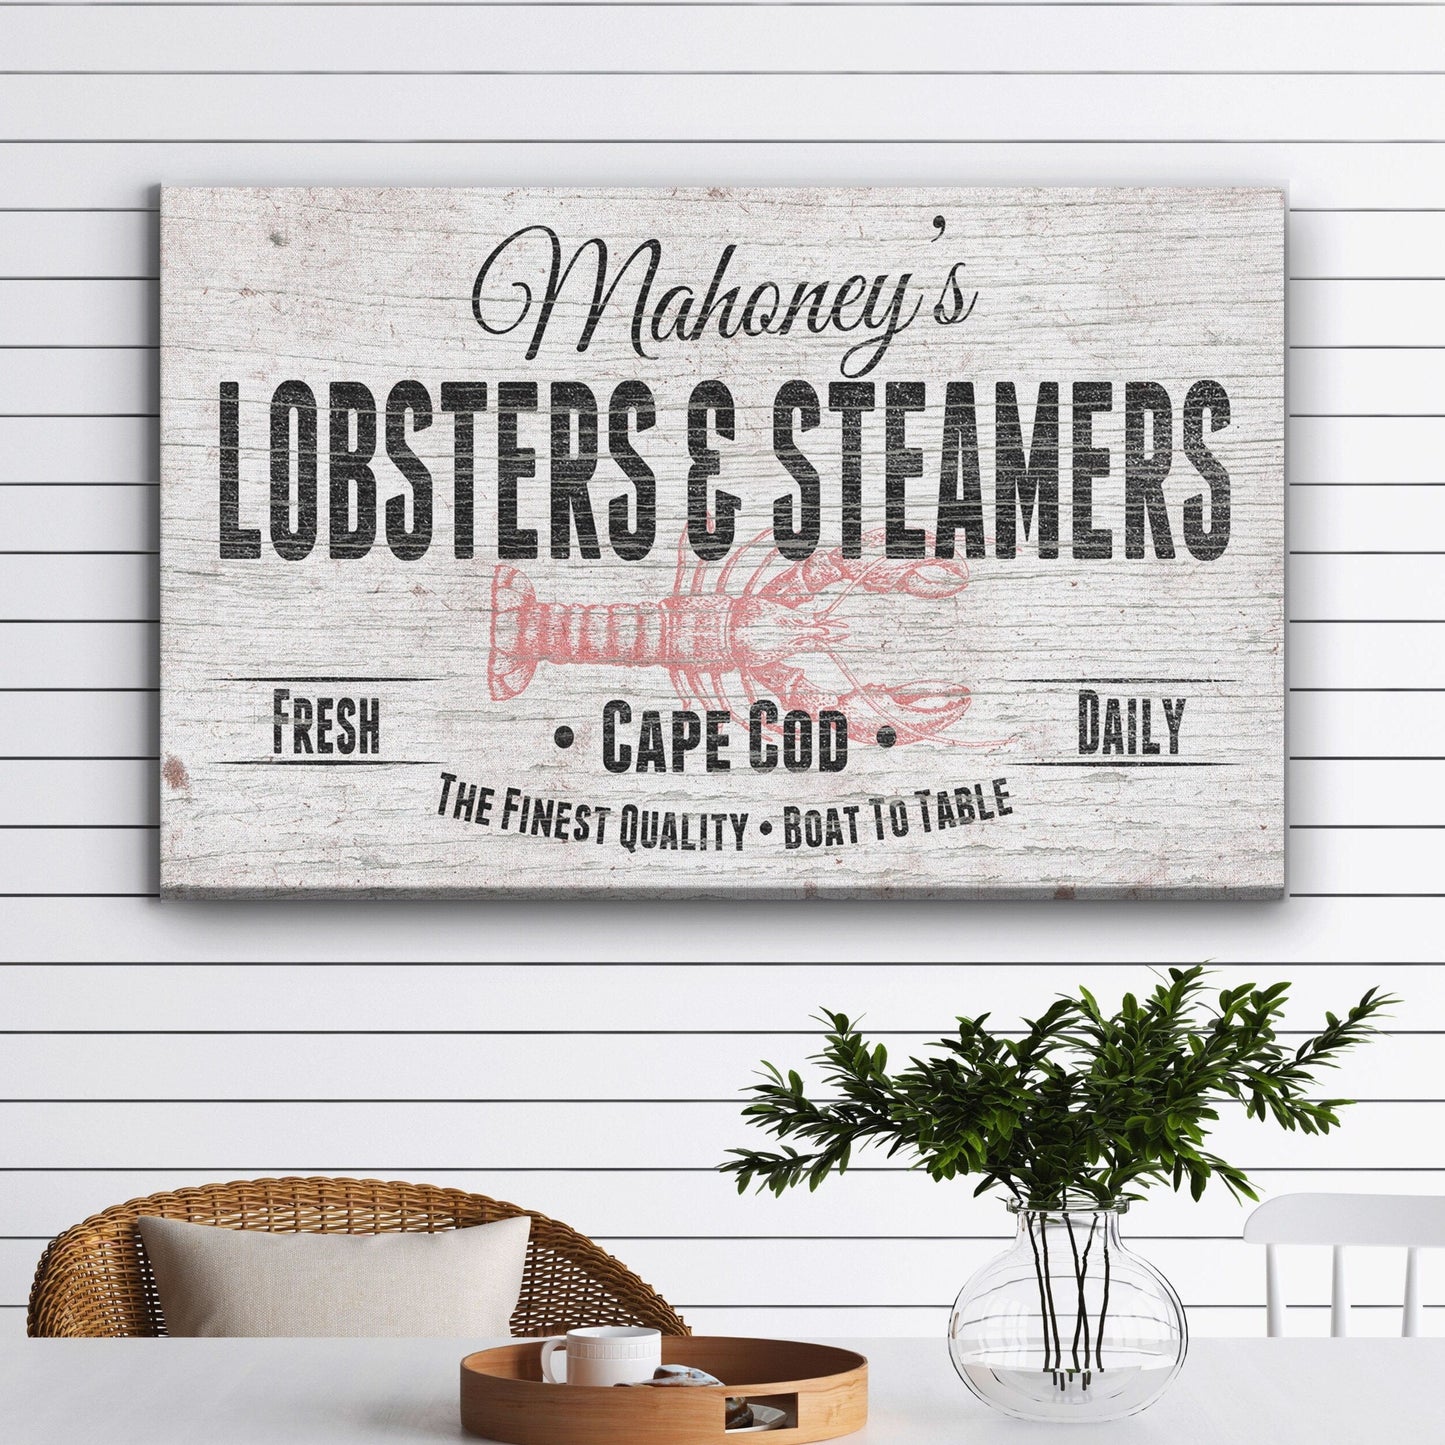 Seafood Sign, Personalized Lobster Restaurant Sign, Seafood Market Kitchen Sign, Beach Decor, Coastal Fresh Lobster Steamers Canvas Sign